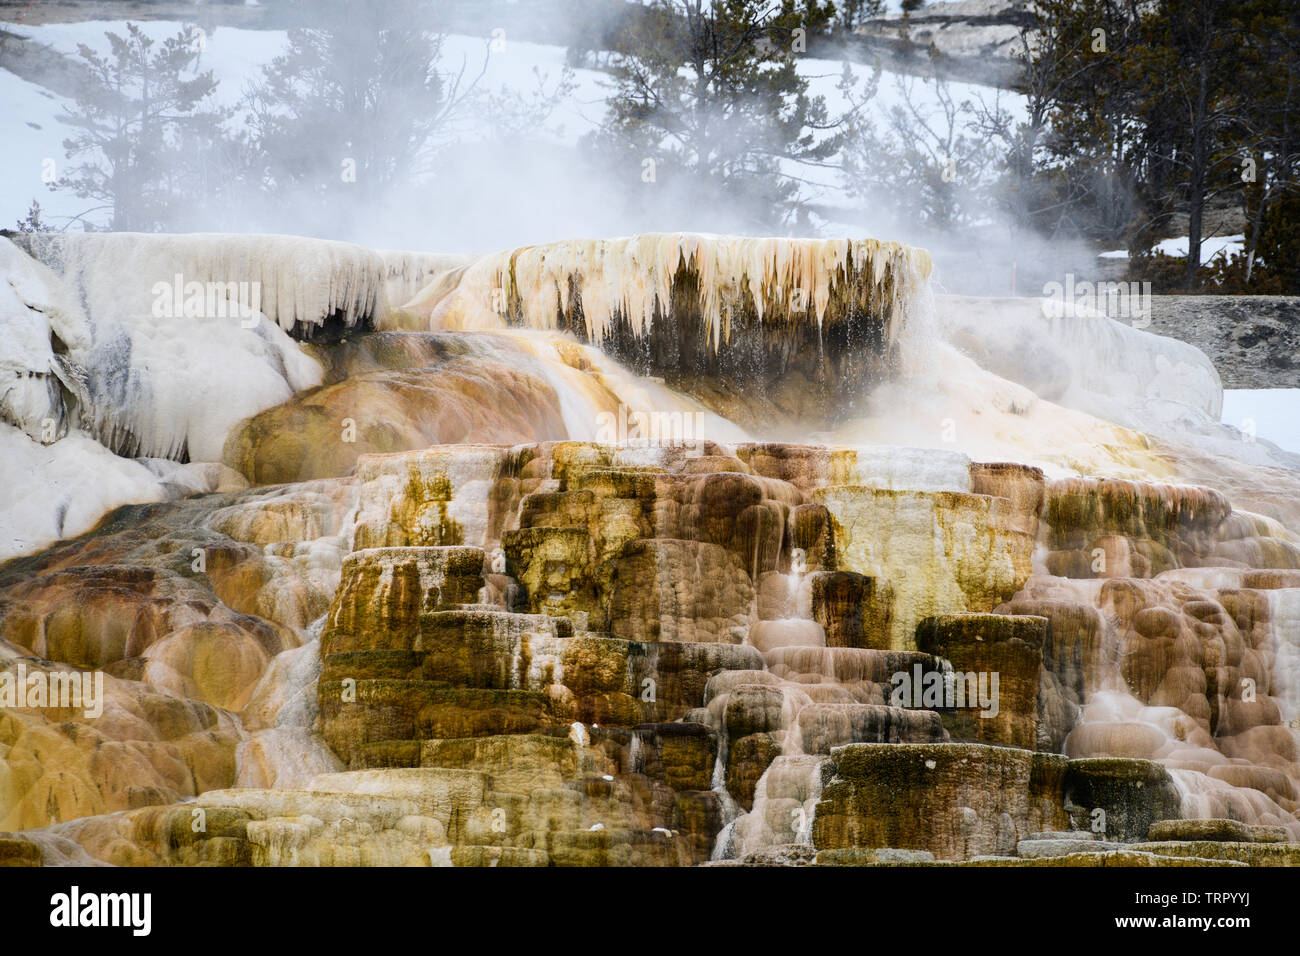 The Mammoth Hot Springs terrace formation near the headquarters of Yellowstone National Park in Wyoming, North America. Stock Photo